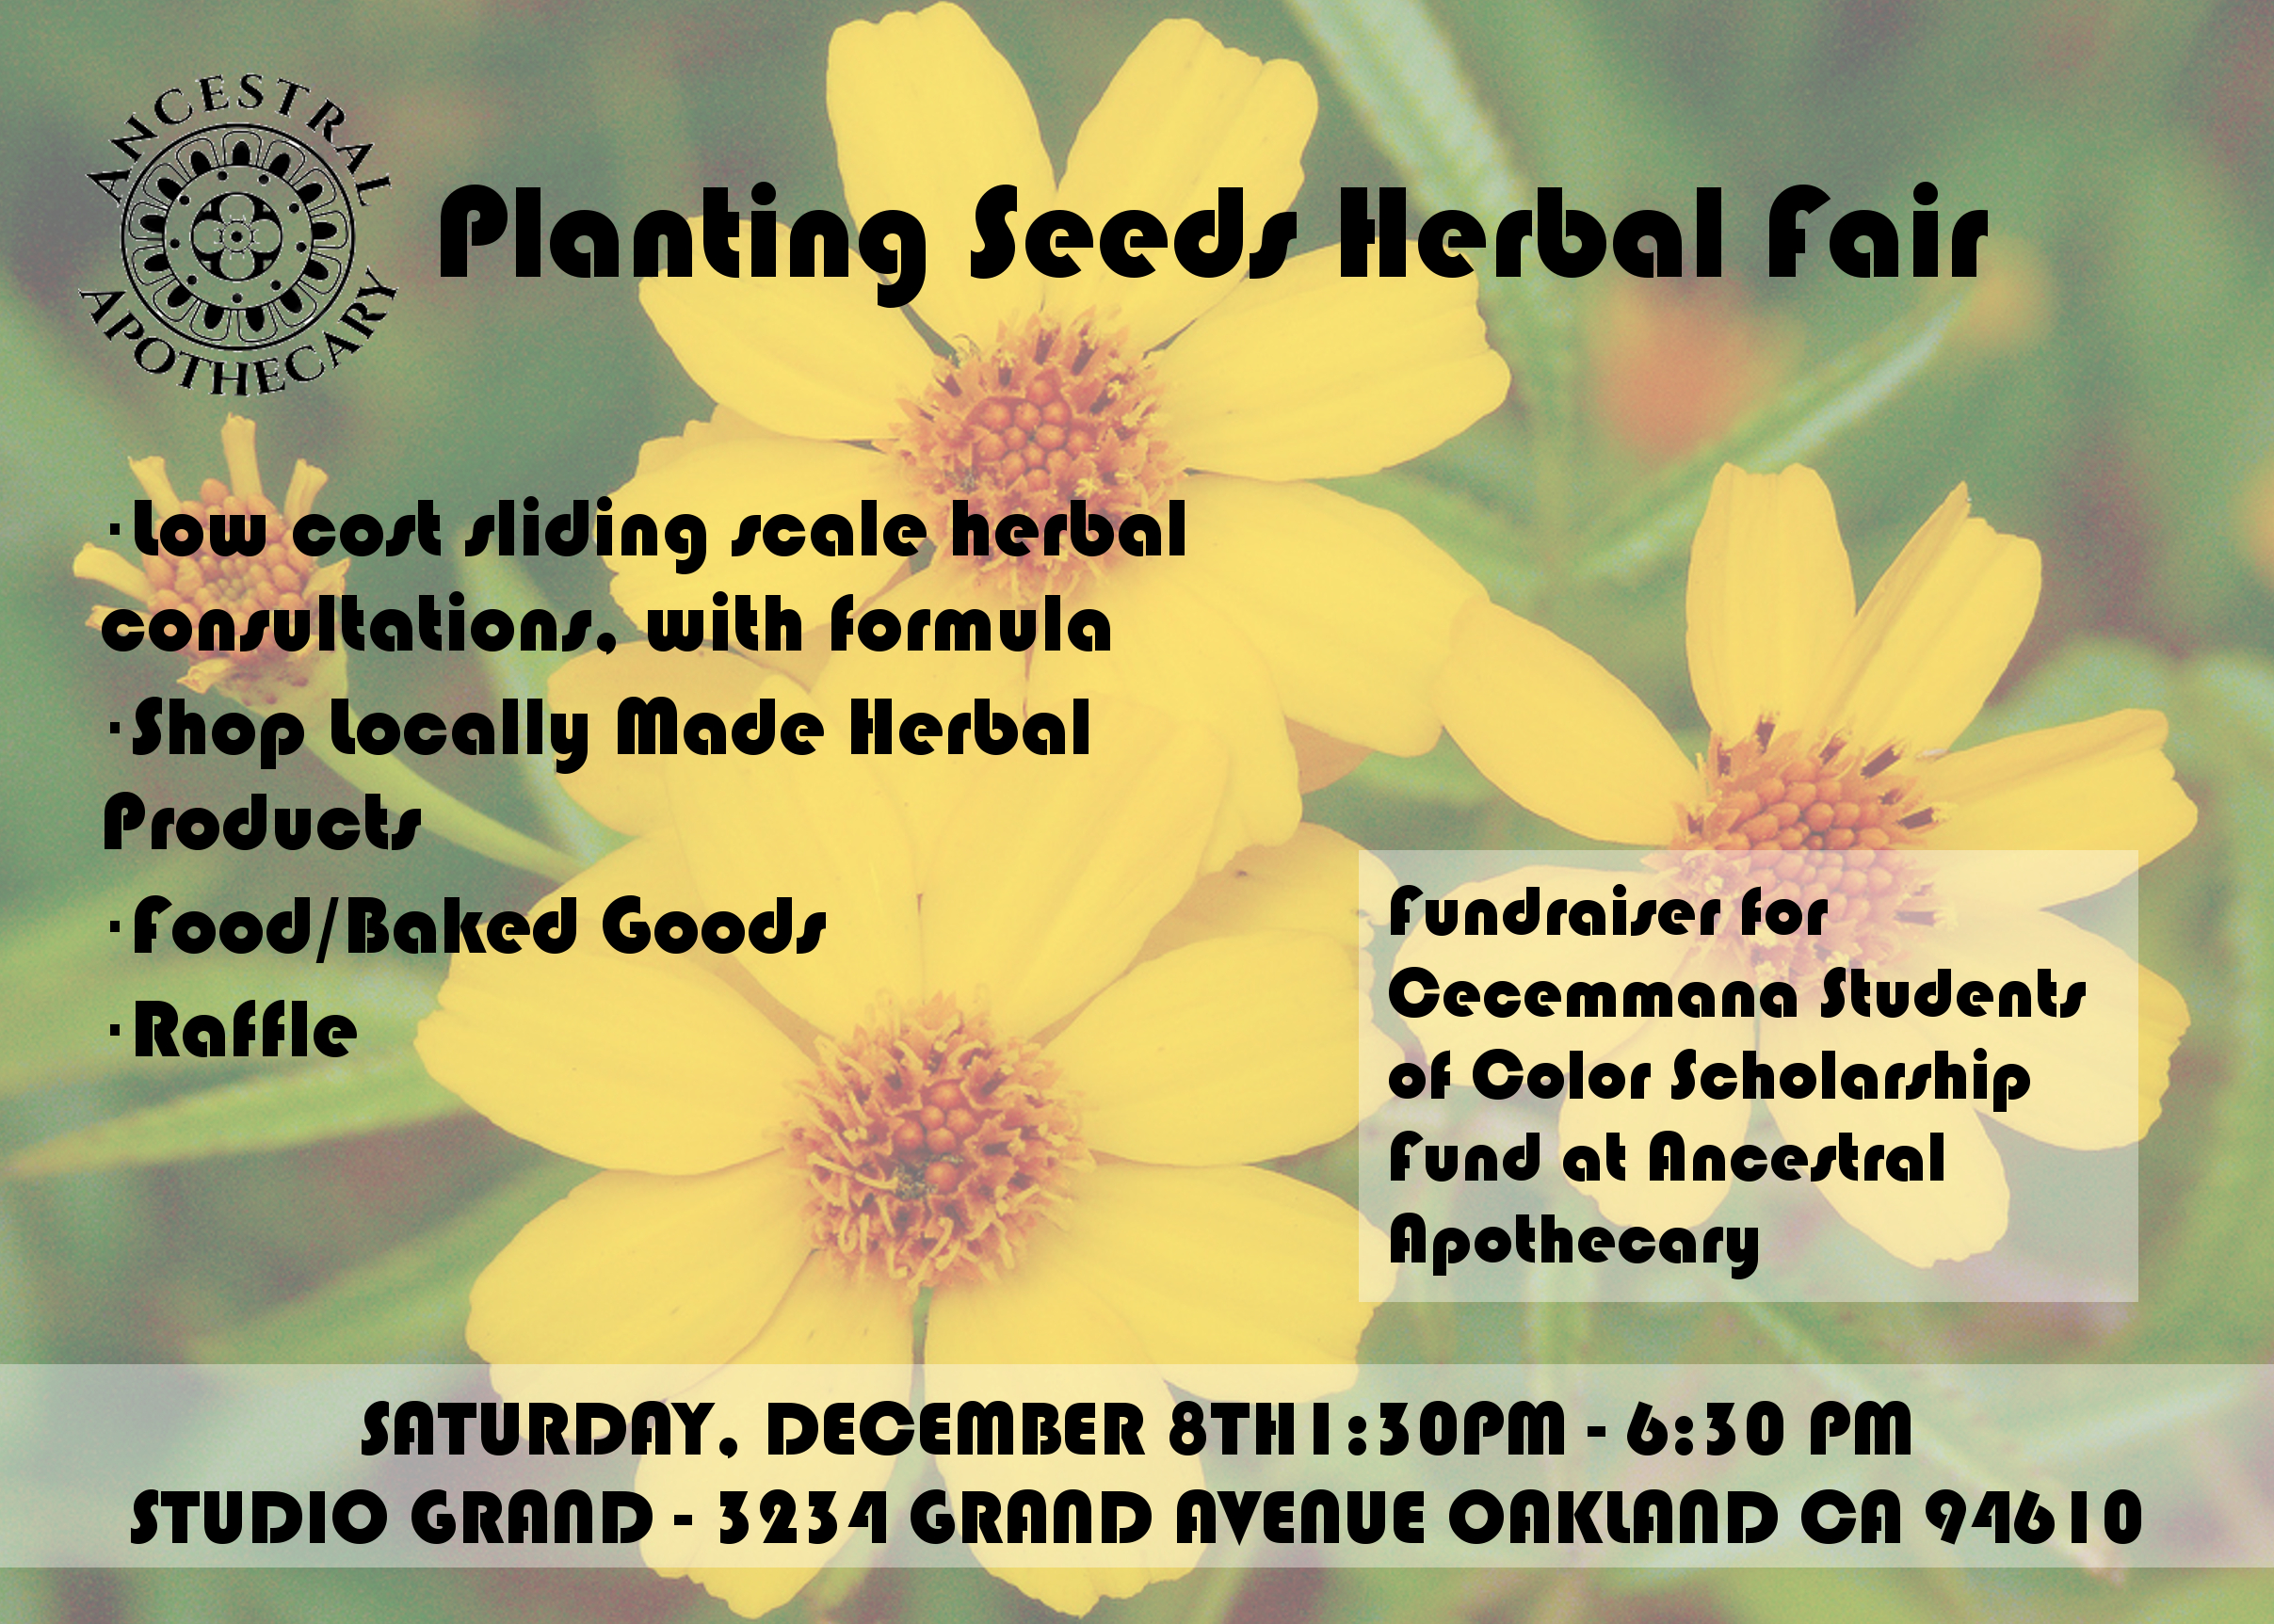 Ancestral Apothecary’s third annual Planting Seeds holiday herbal fair